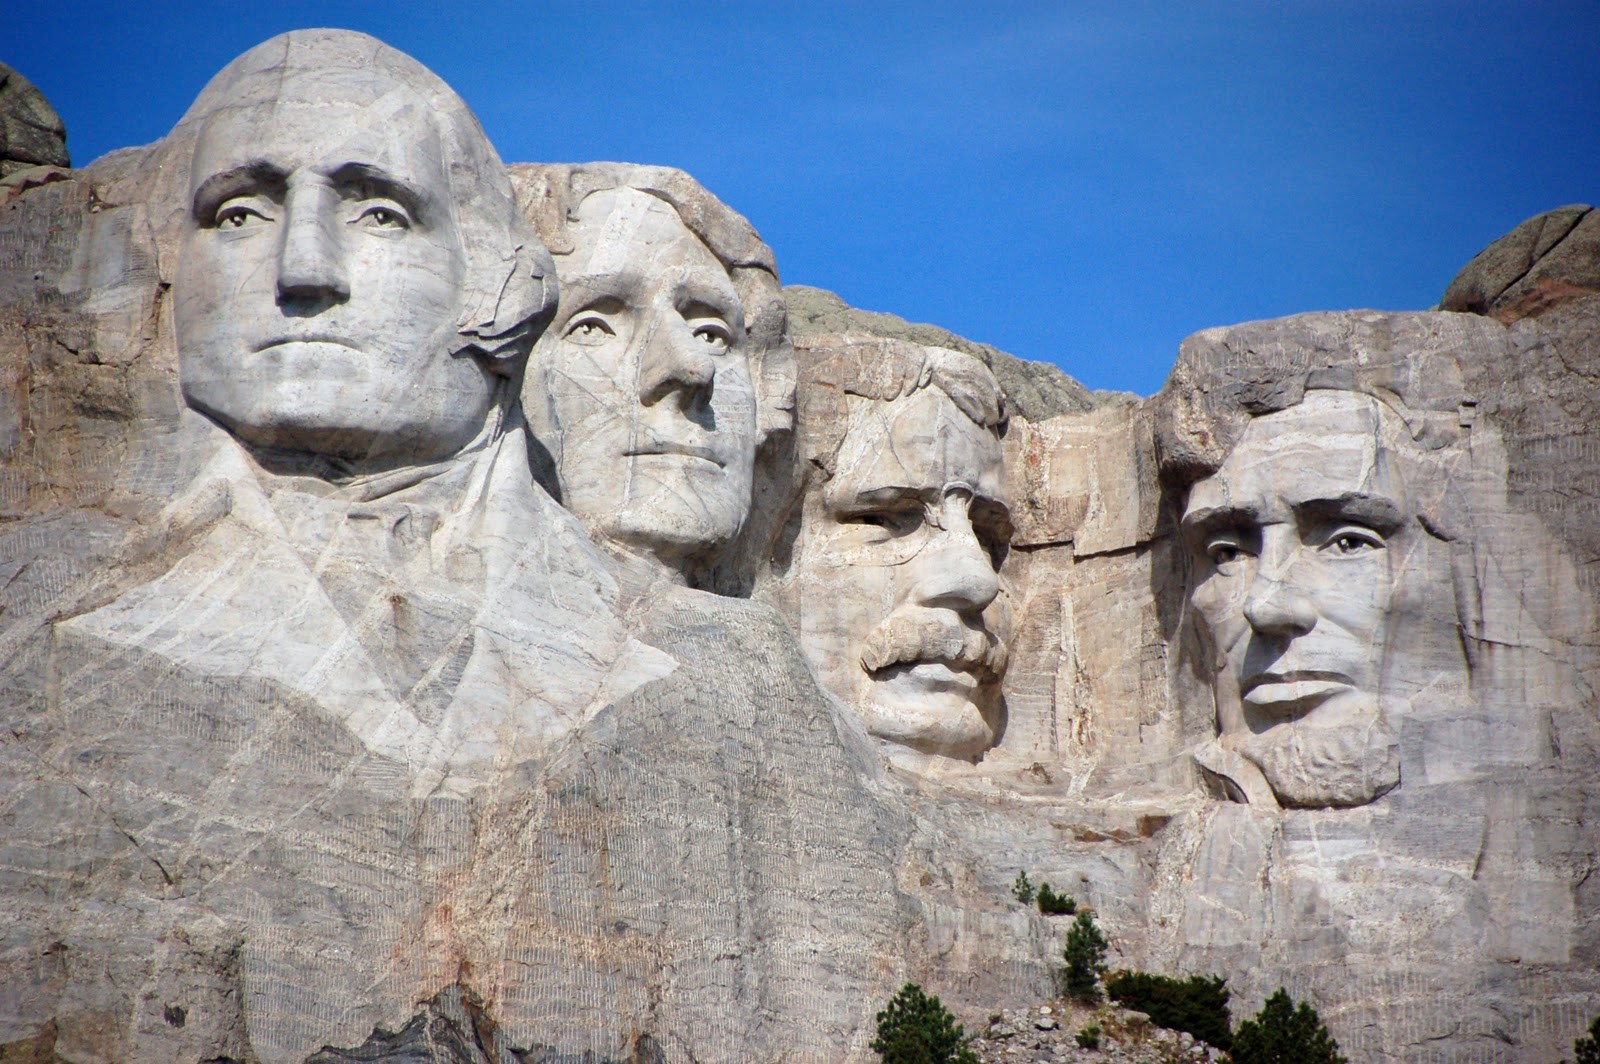 Elementary School Students Score Better Than Adults on This General Knowledge Quiz Presidents Day, Mount Rushmore, South Dakota